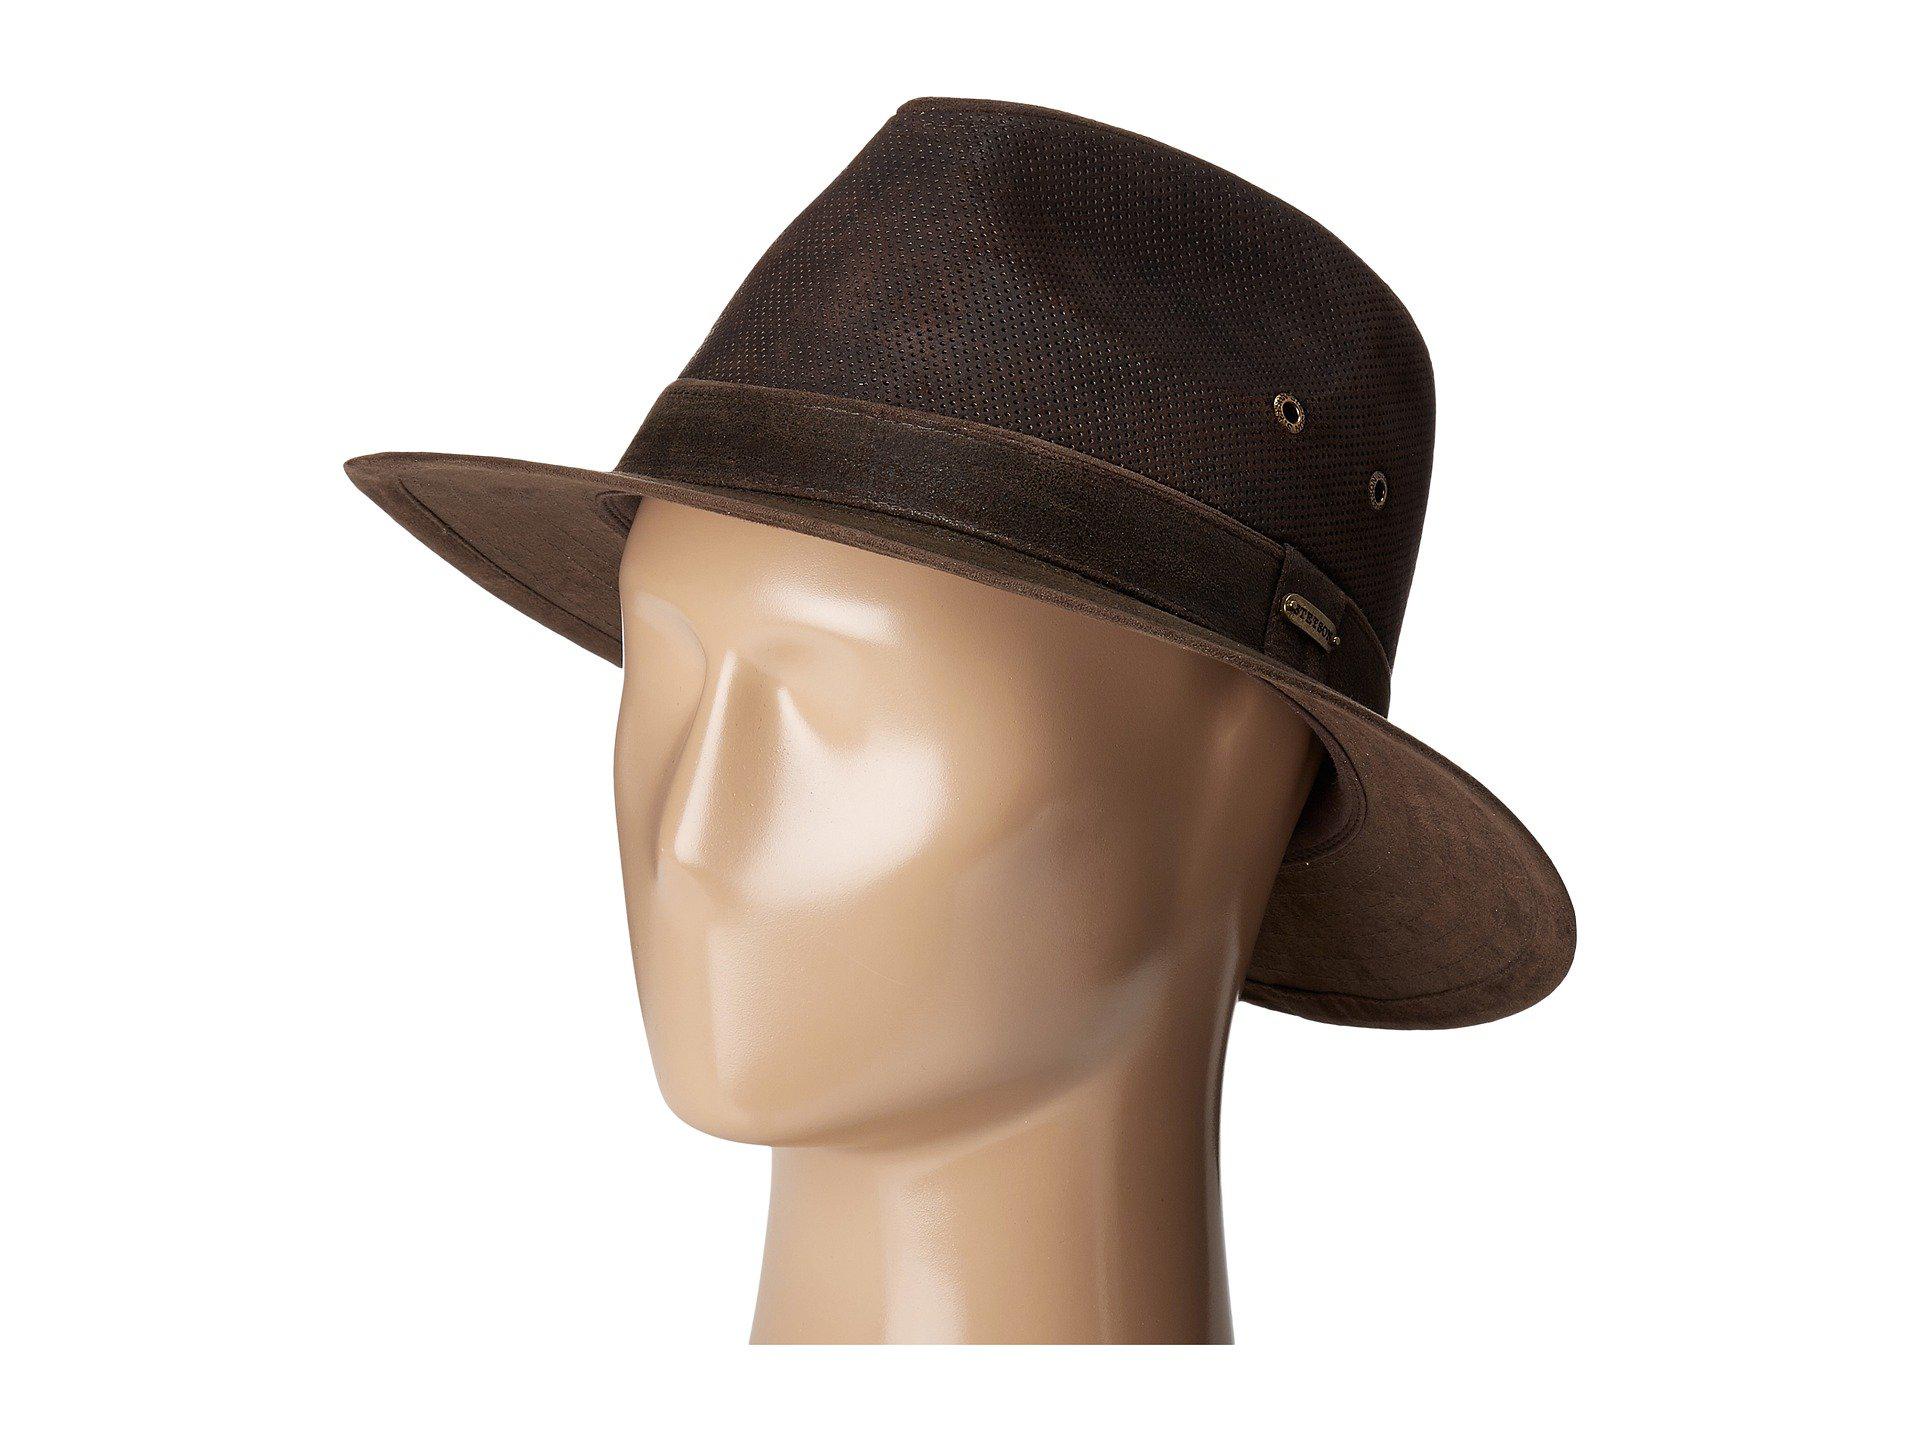 Lyst Stetson Weathered Leather Safari (brown) Traditional Hats in